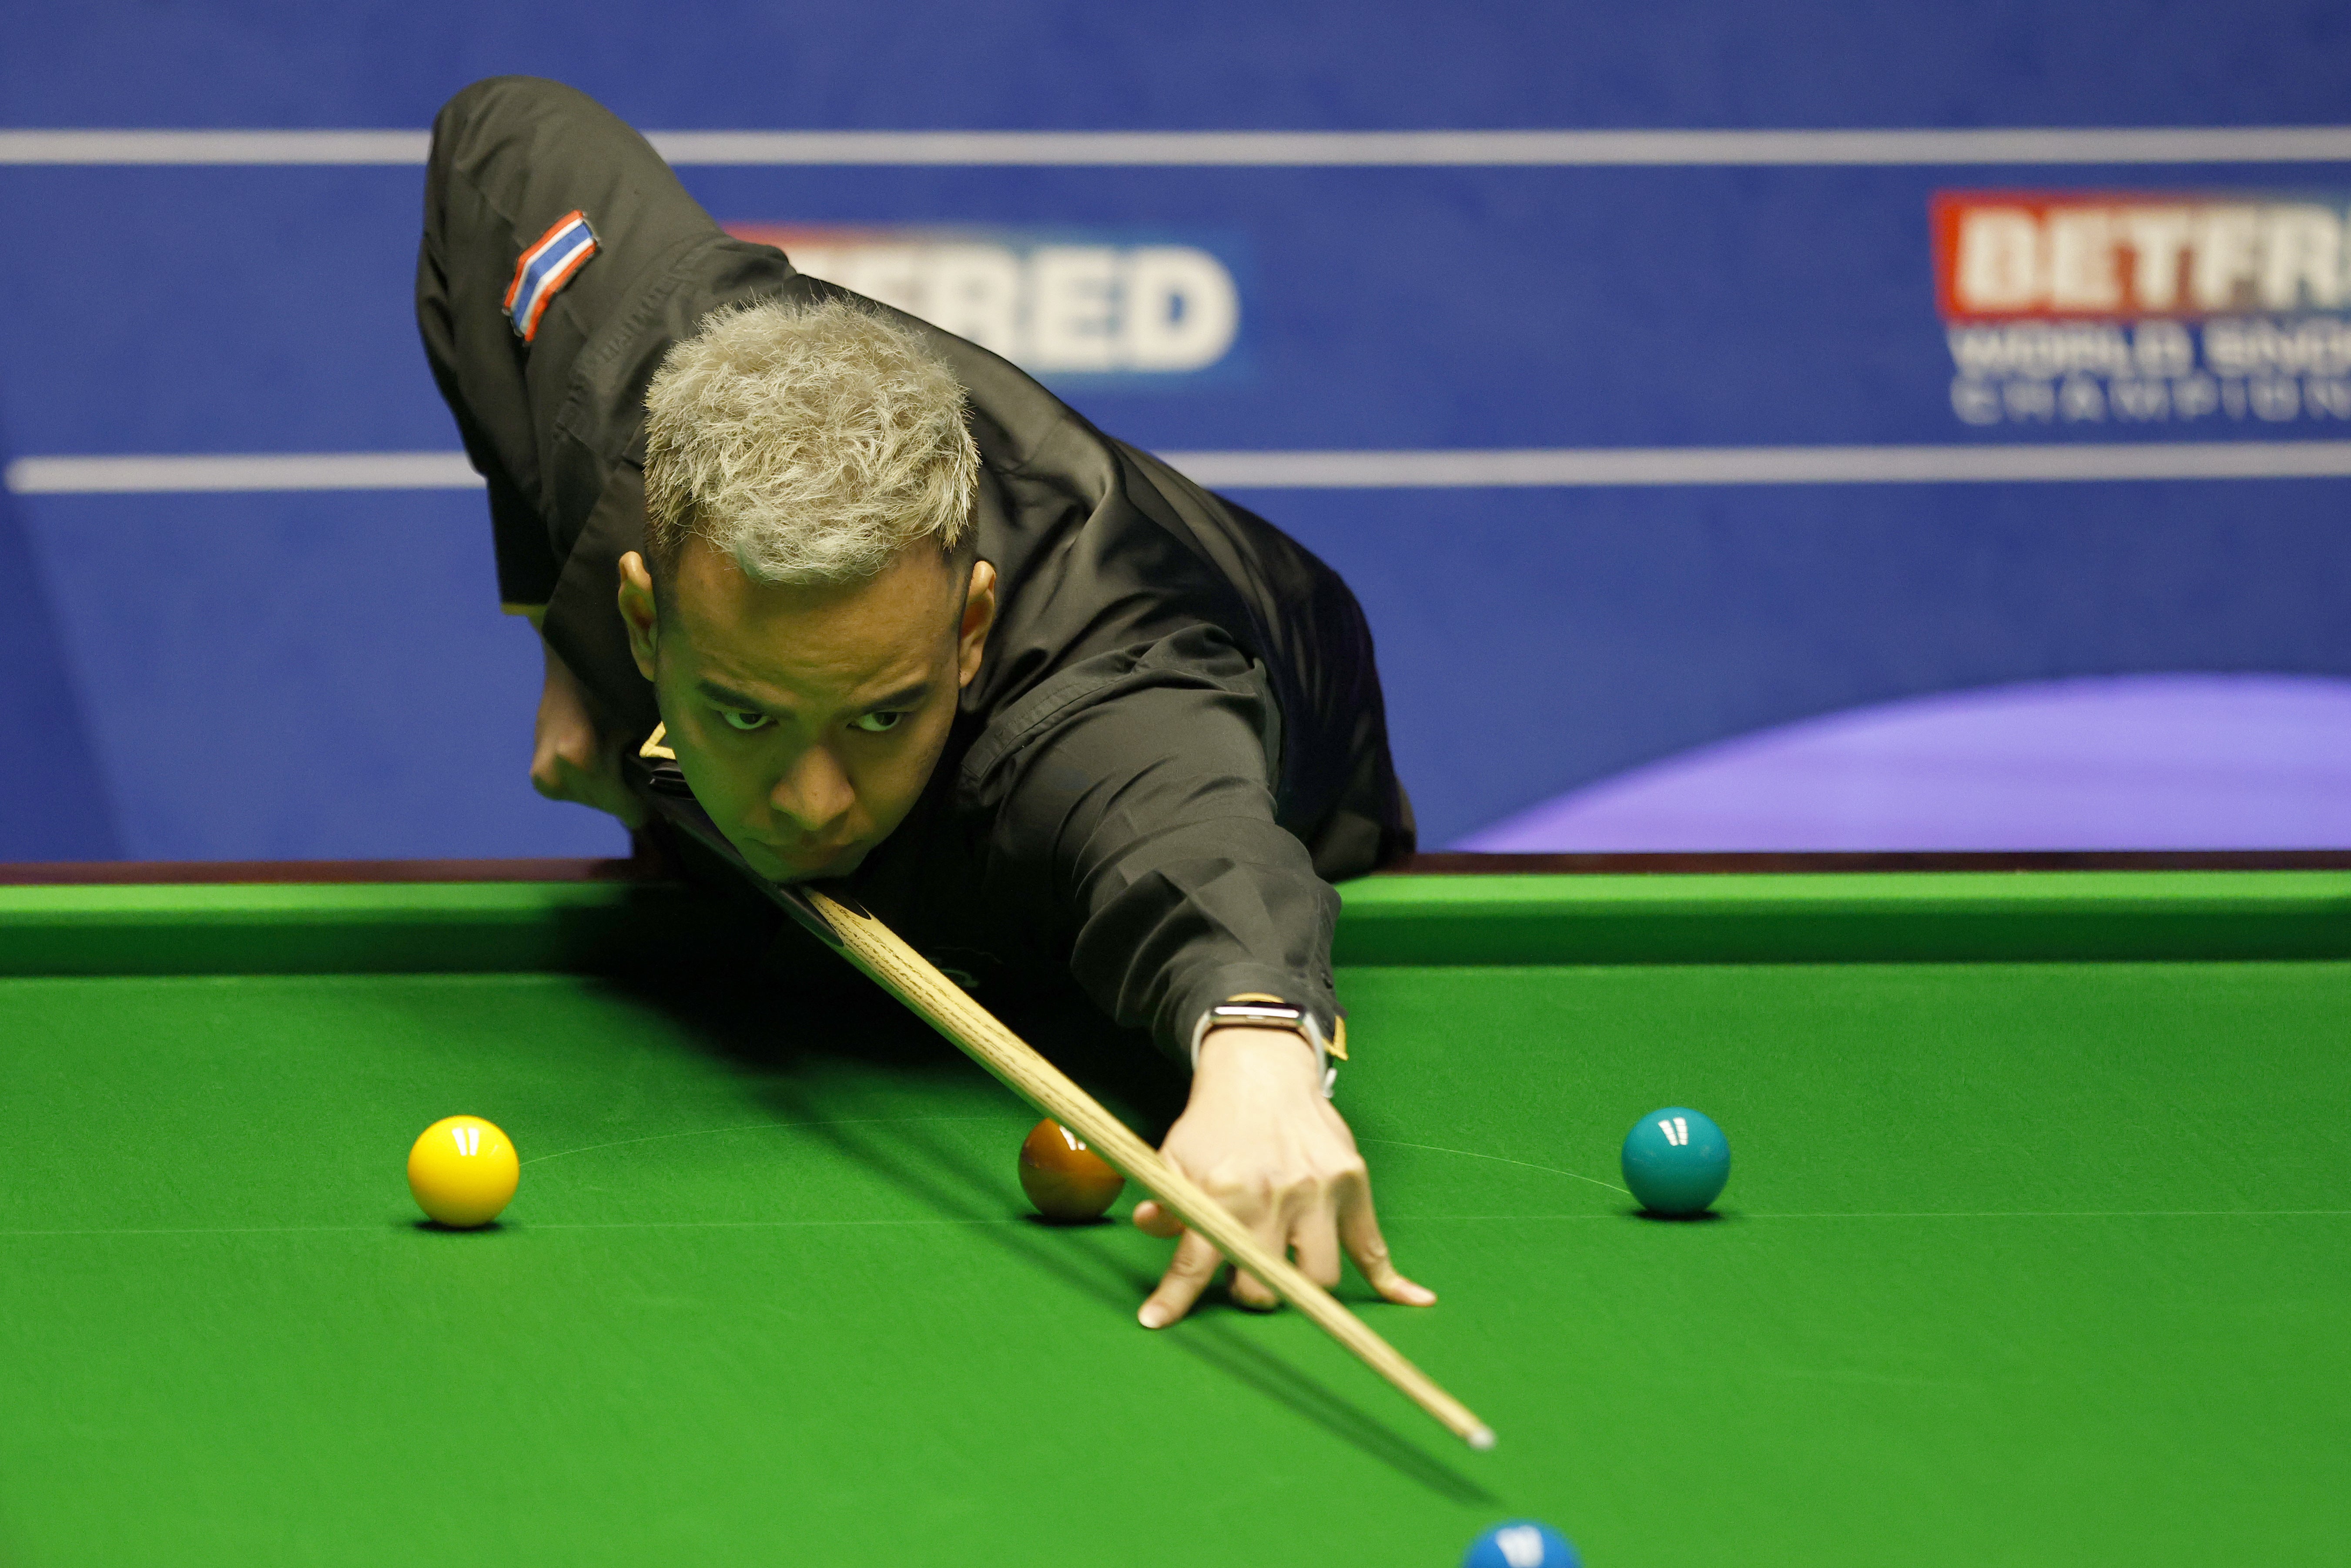 Noppon Saengkham beats Luca Brecel to book place in second round The Independent